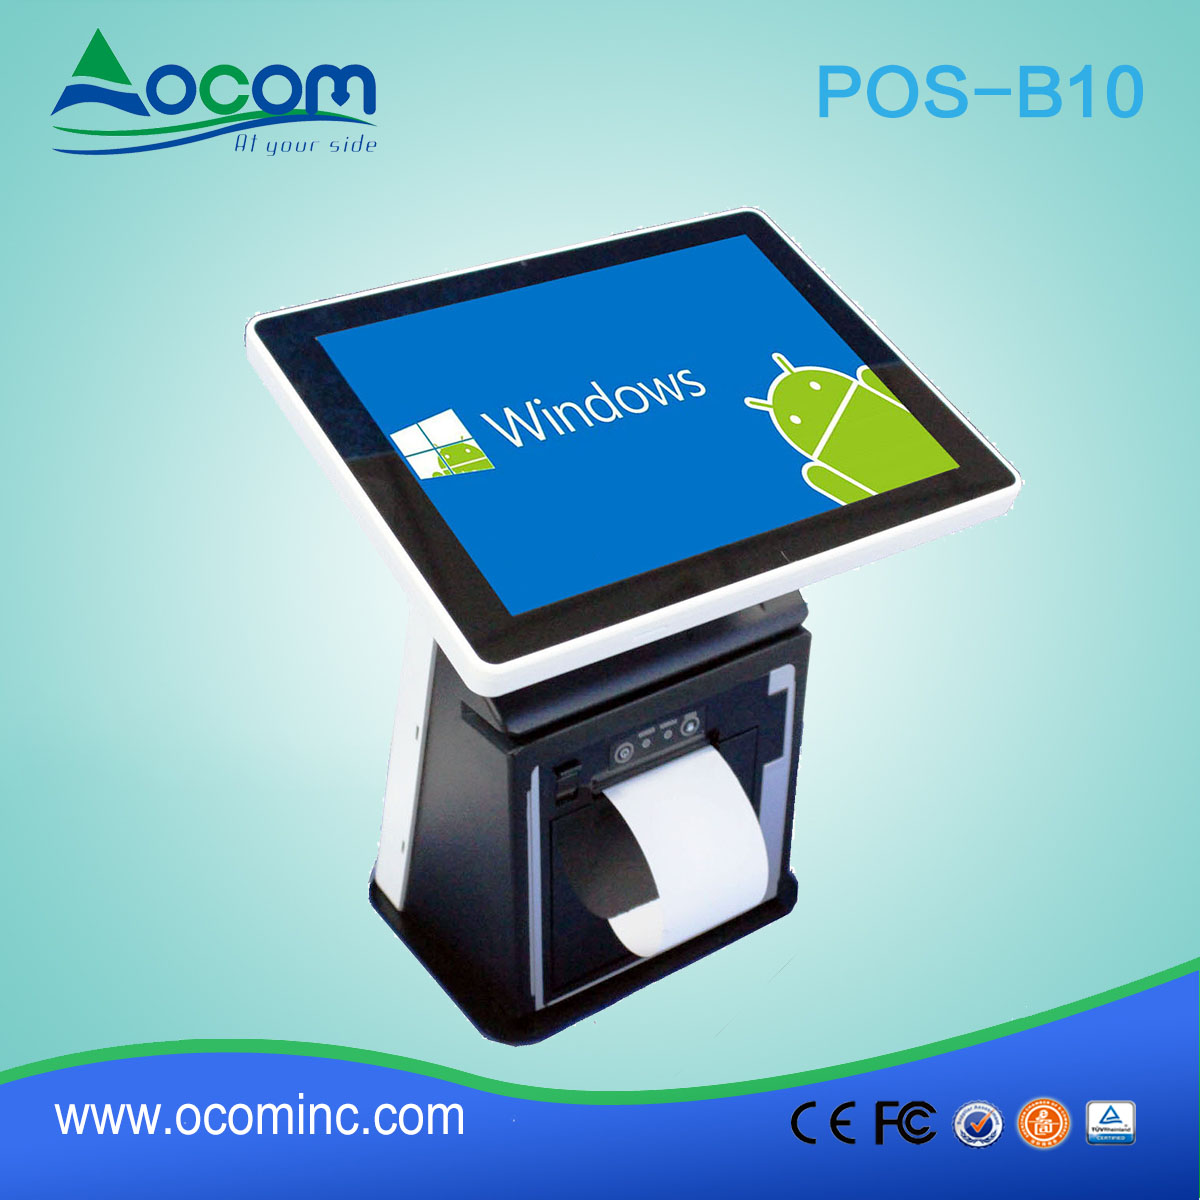 POS-B10---hot selling 10.1" all in one Android pos terminal with thermal printer supermarket